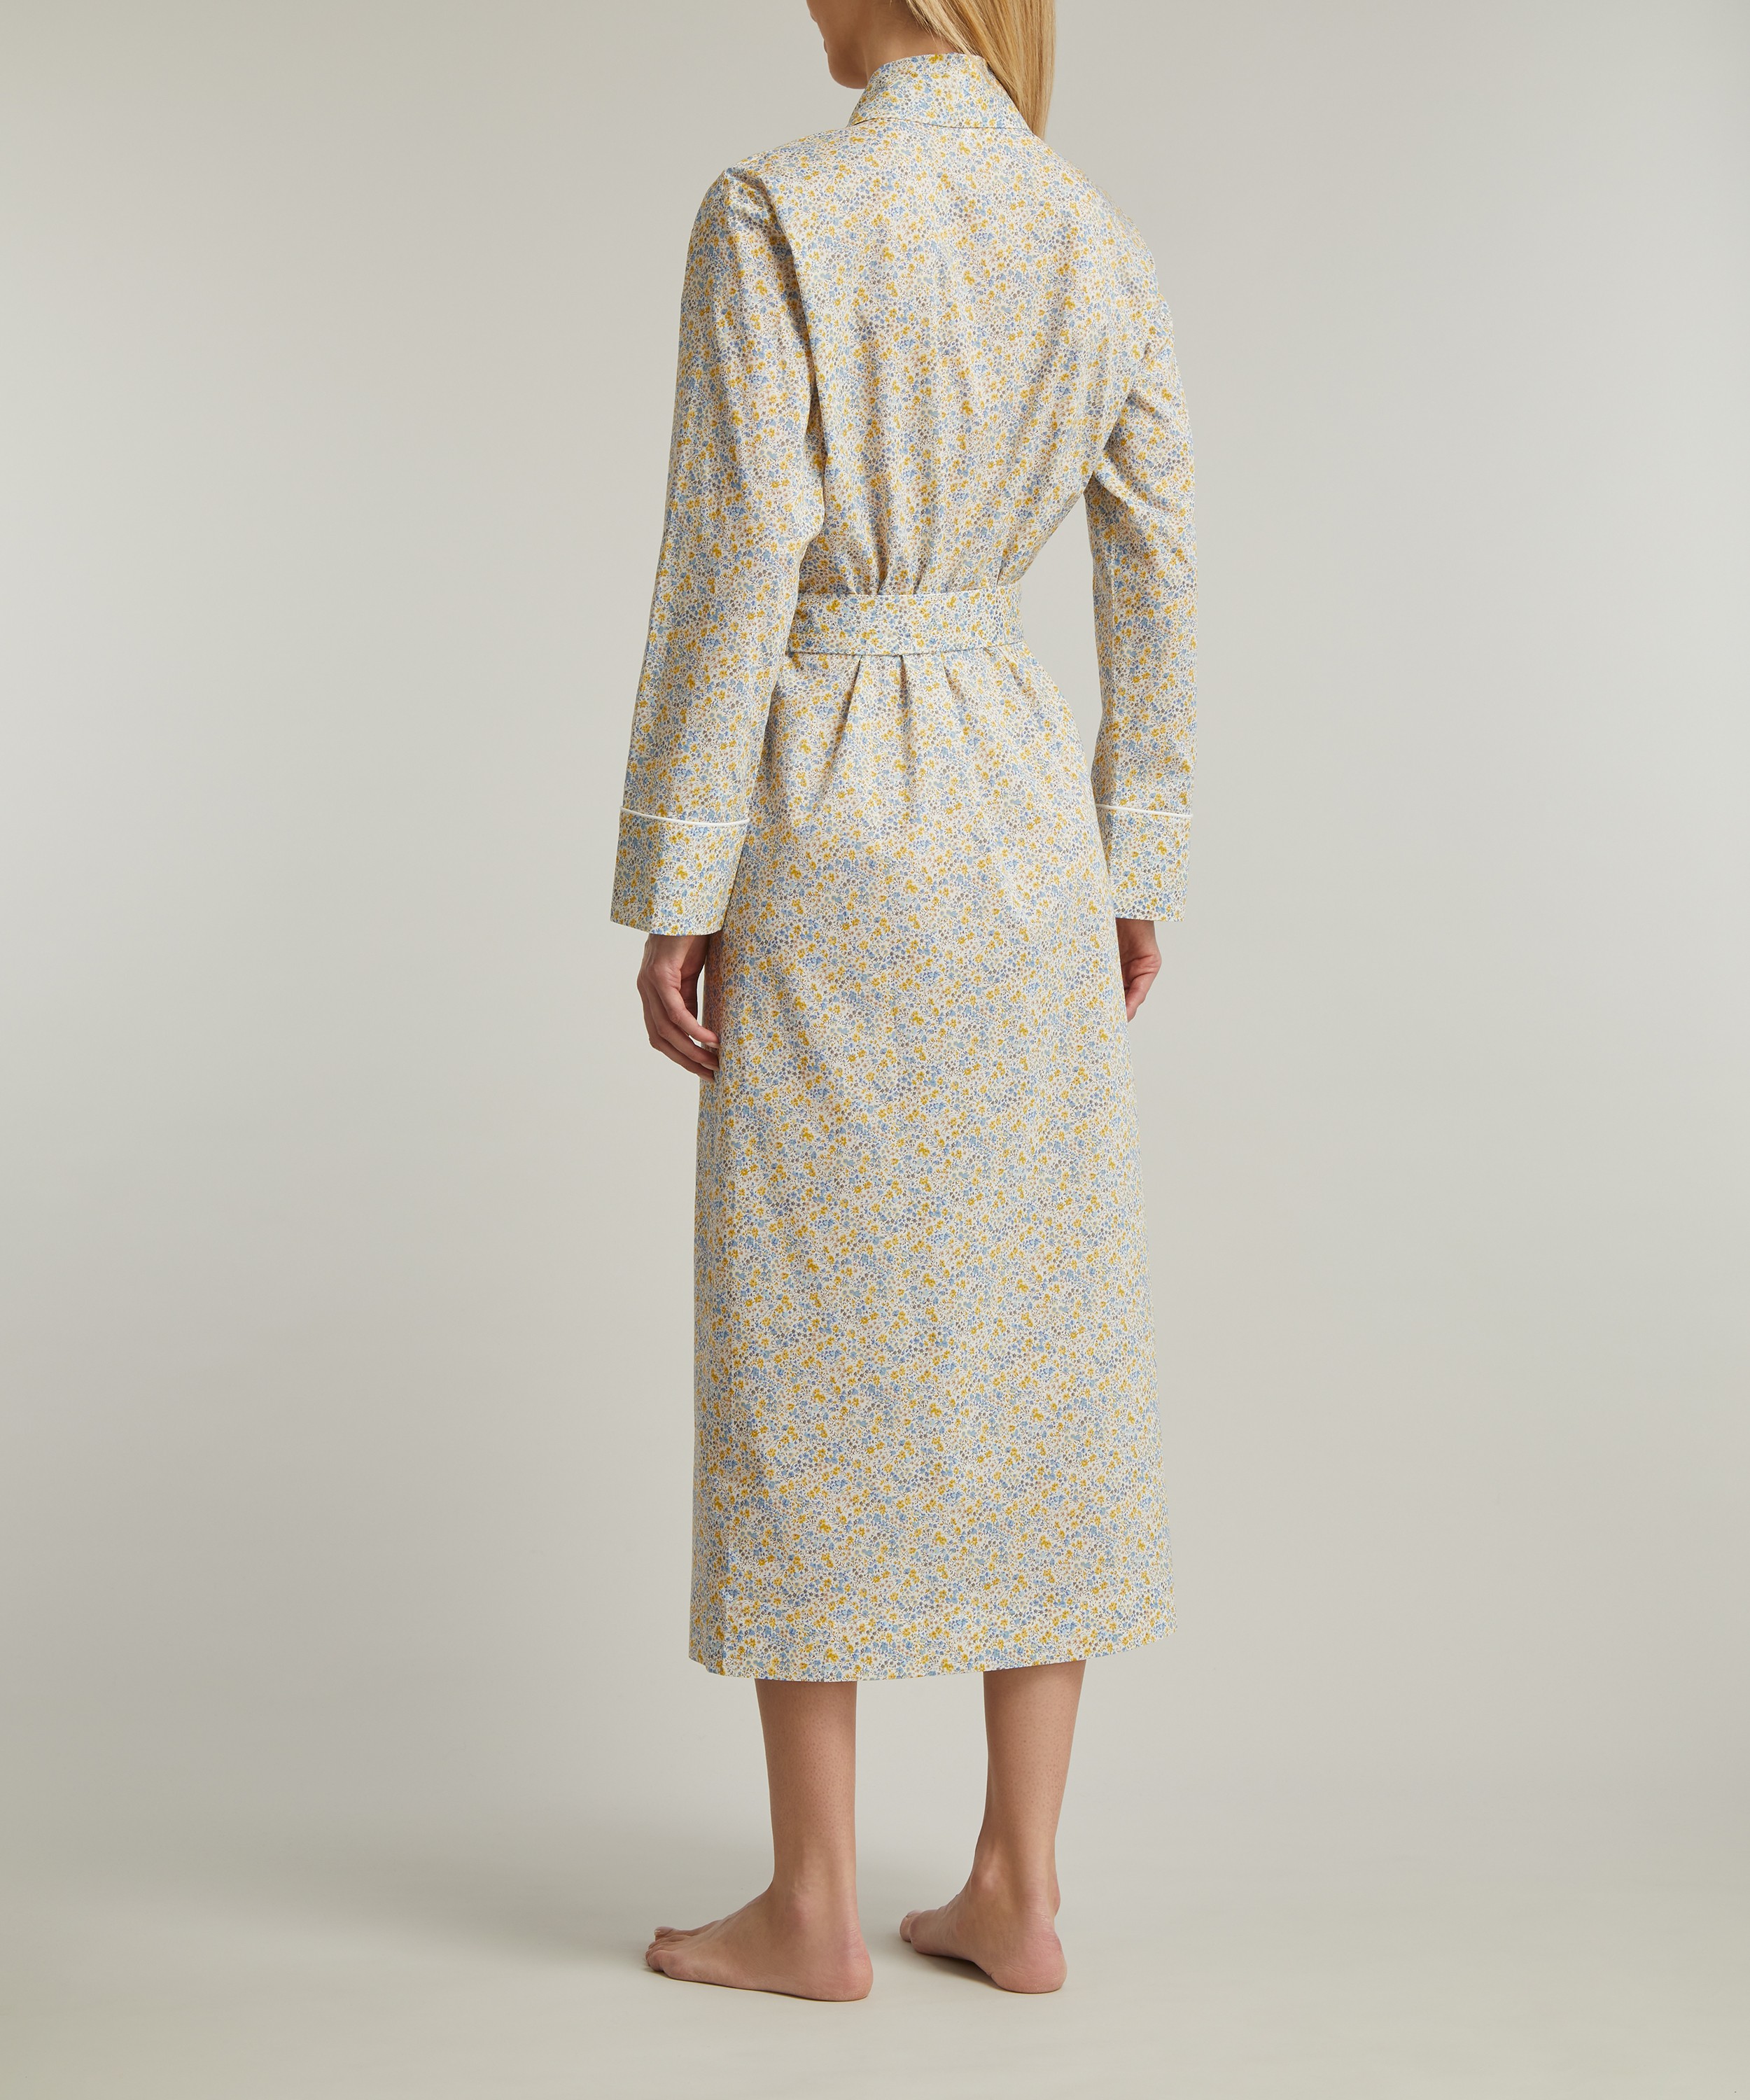 Liberty - Phoebe Tana Lawn™ Cotton Classic Robe image number 3